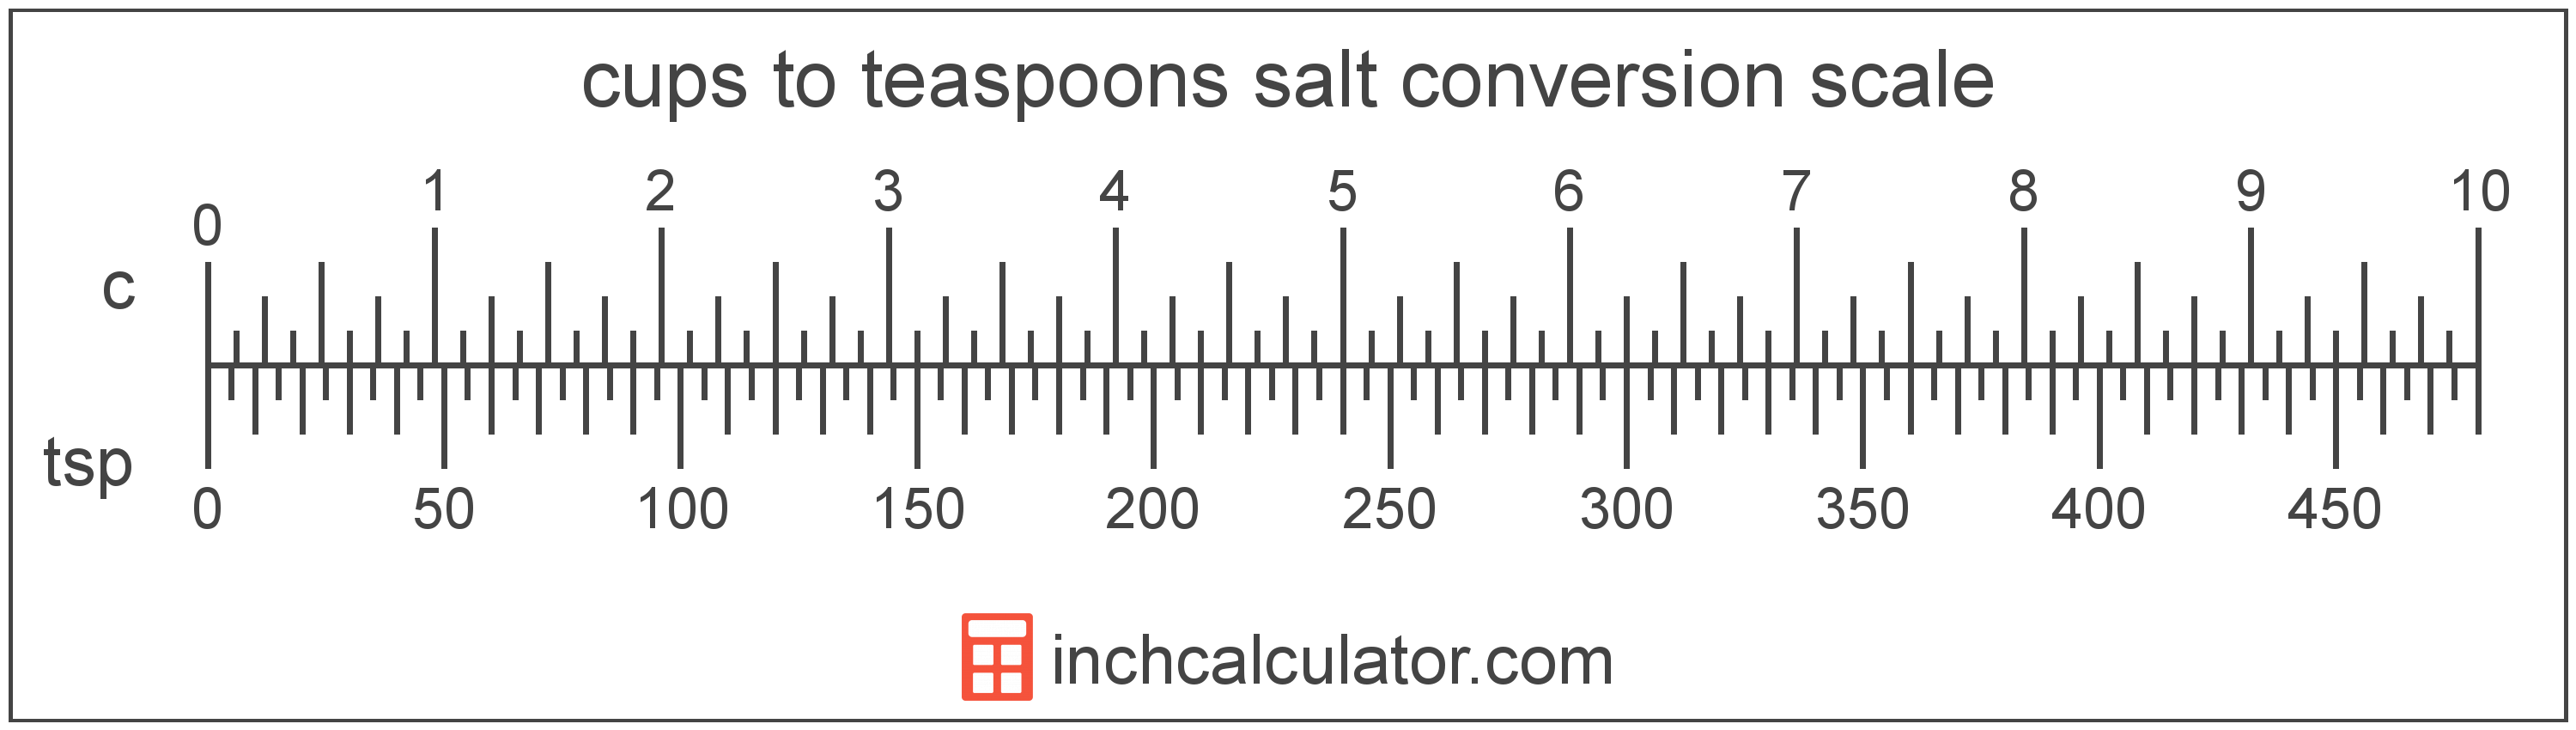 conversion scale showing teaspoons and equivalent cups salt volume values